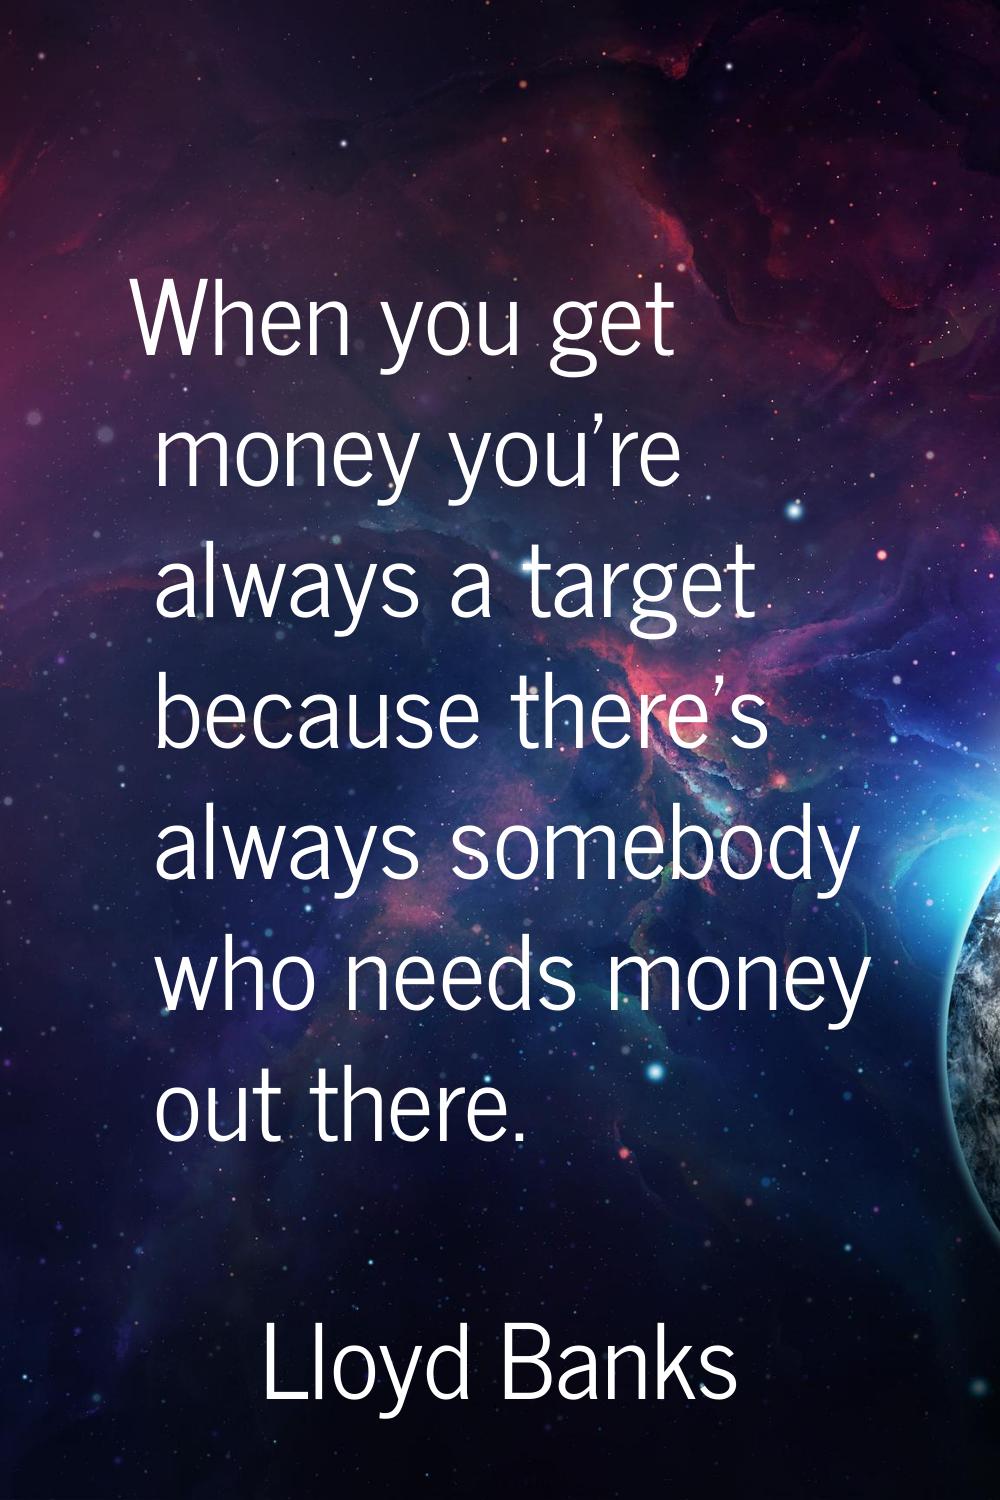 When you get money you're always a target because there's always somebody who needs money out there